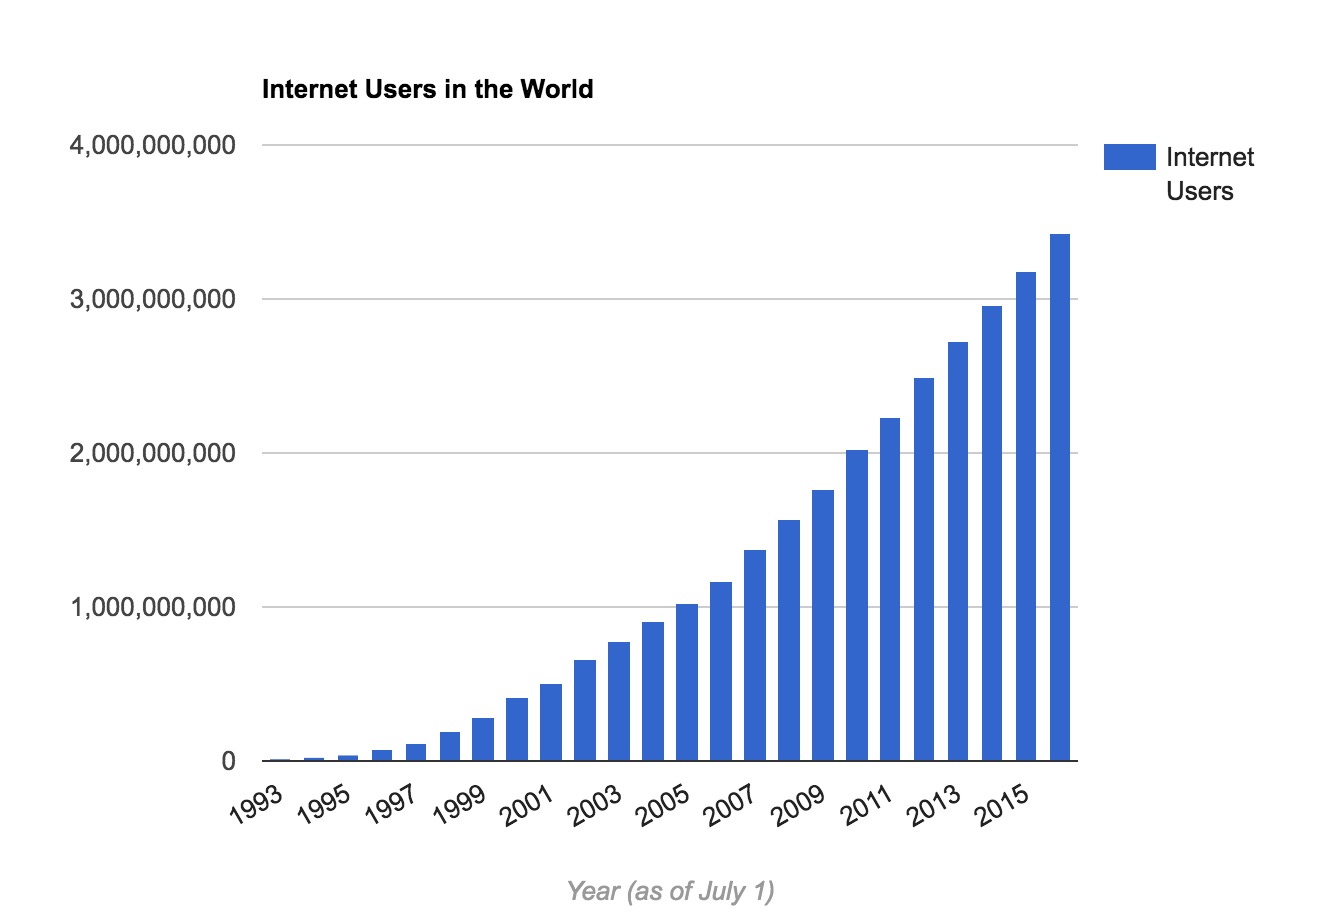 Around 40% of the world population has an internet connection today. In 1995, it was less than 1%. The number of internet users has increased tenfold from 1999 to 2013.
The first billion was reached in 2005. The second billion in 2010. The third billion in 2014. The chart shows the number of global internet users per year since 1993. Access to the internet means that the level of education goes up and it has a.o. positive effect on the economy, especially in developing countries.